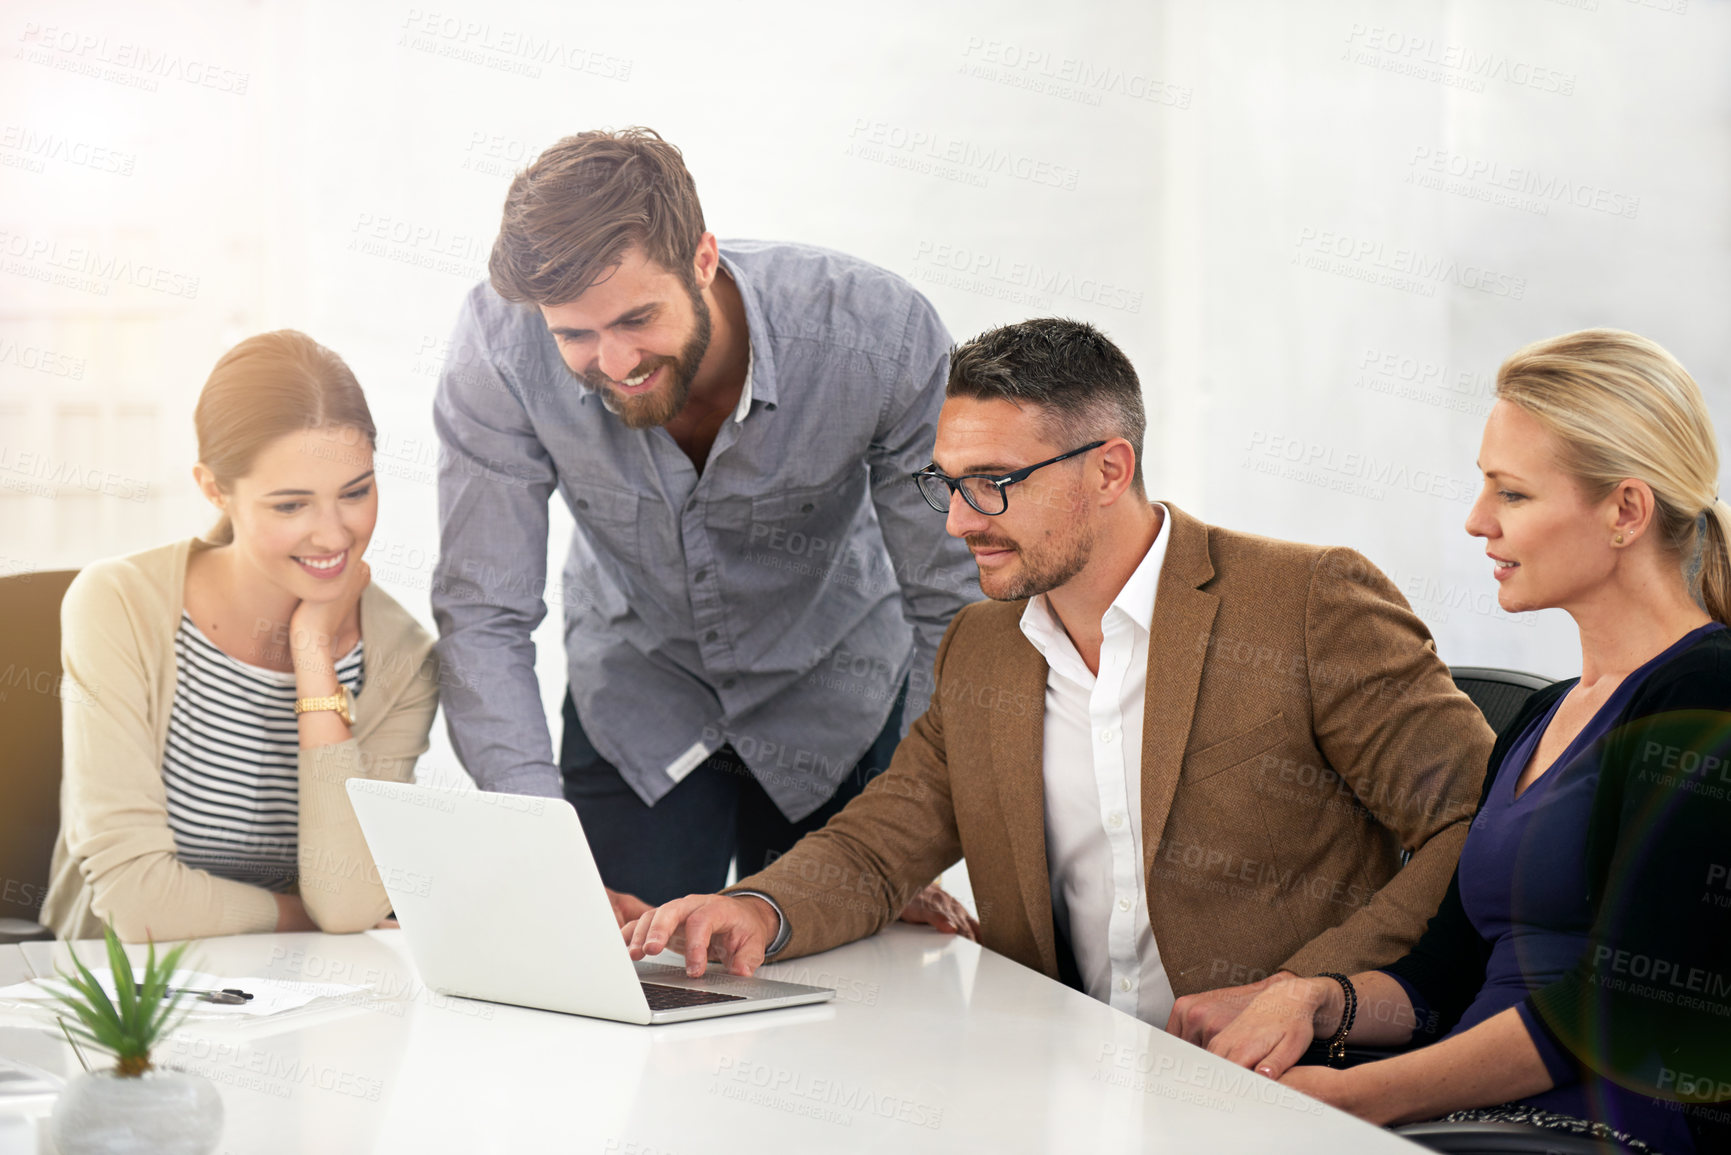 Buy stock photo A group of businesspeople looking at work on a laptop in a meeting